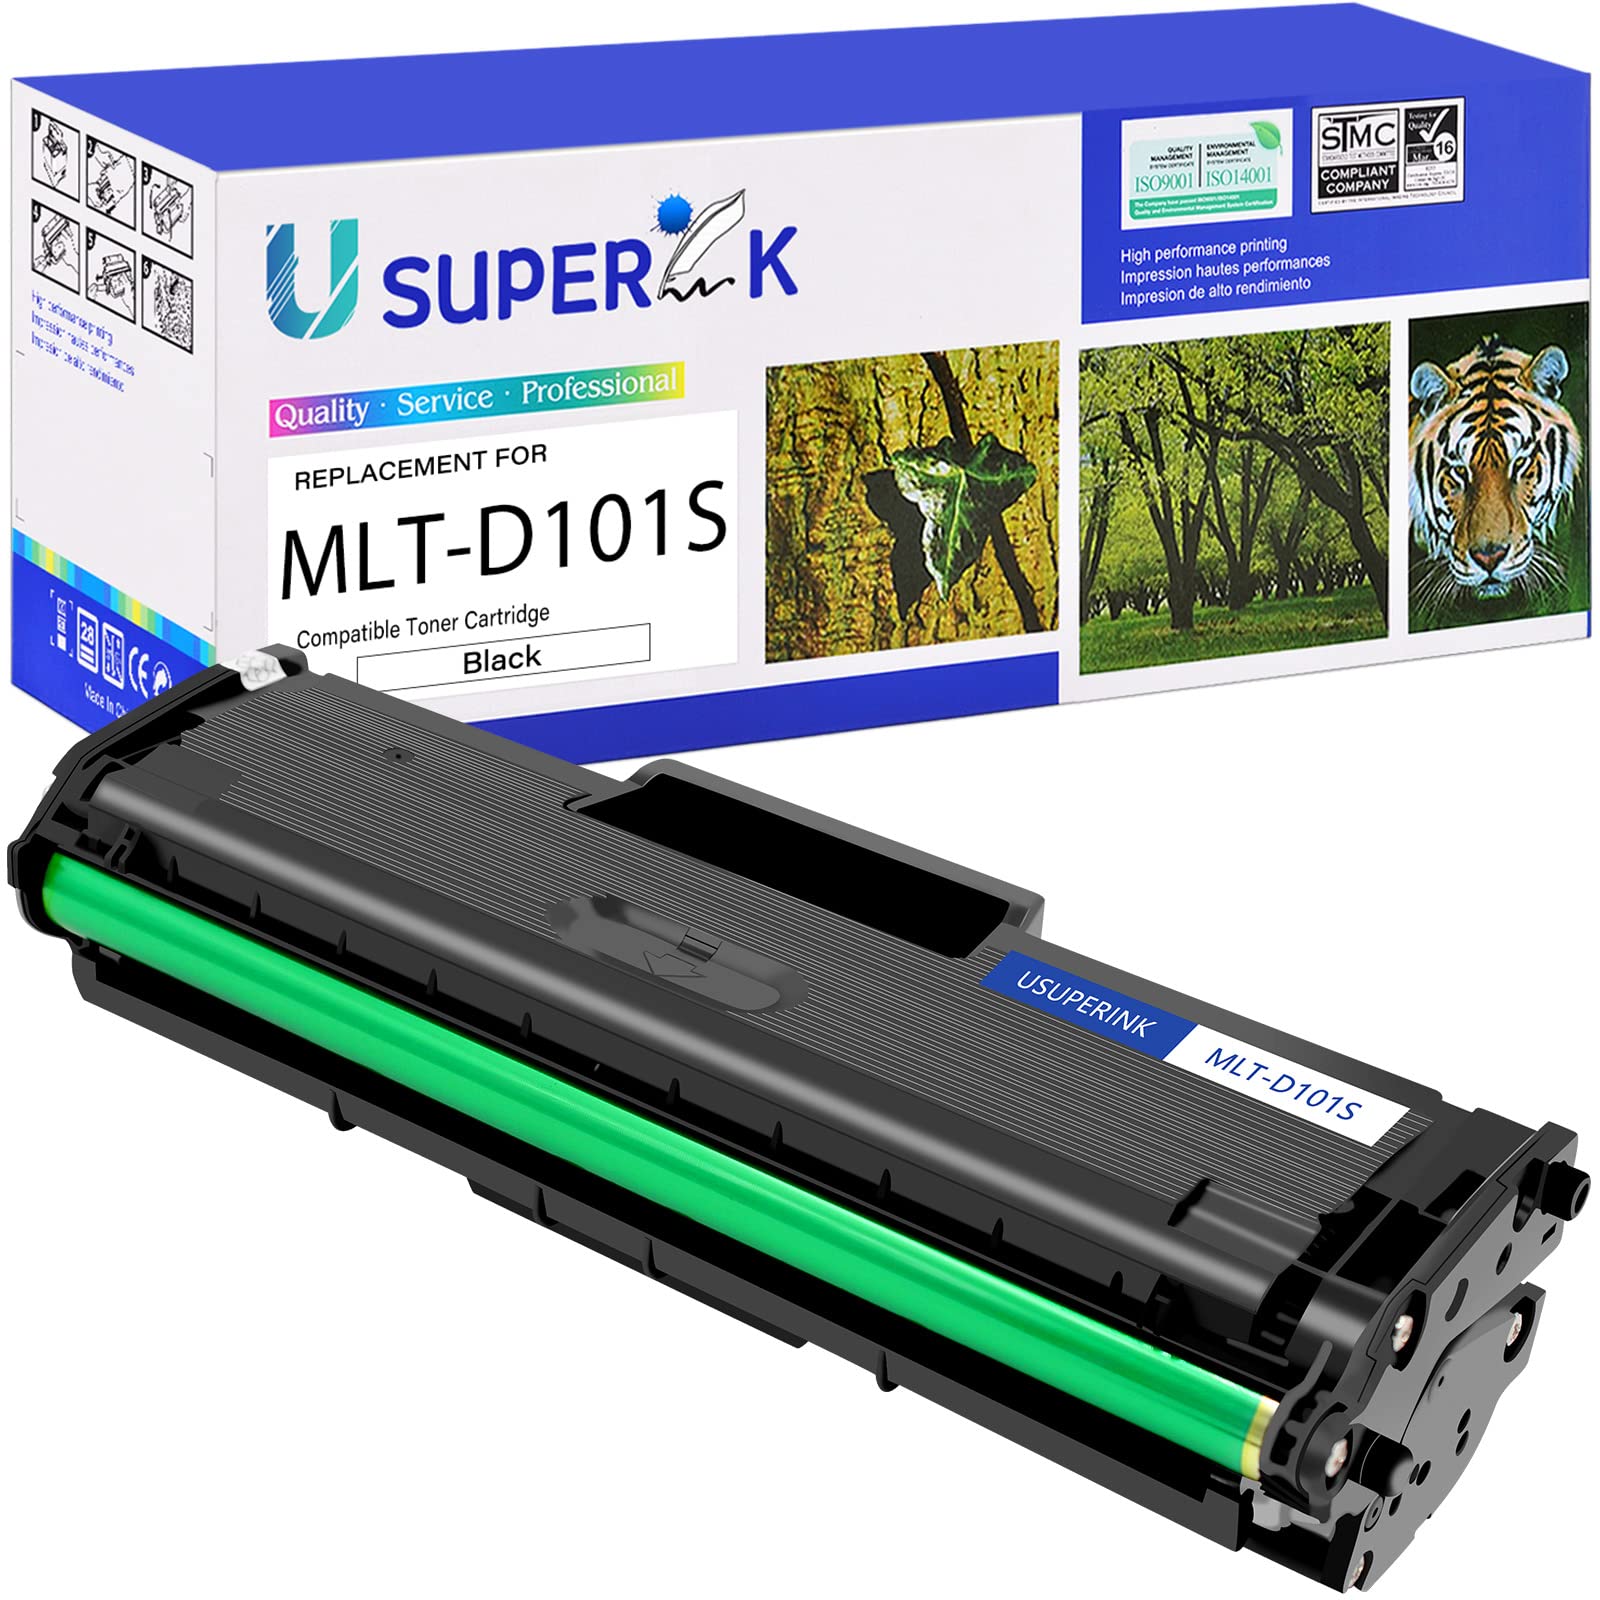 OTHER COMPATIBLE TONER CANON D101S